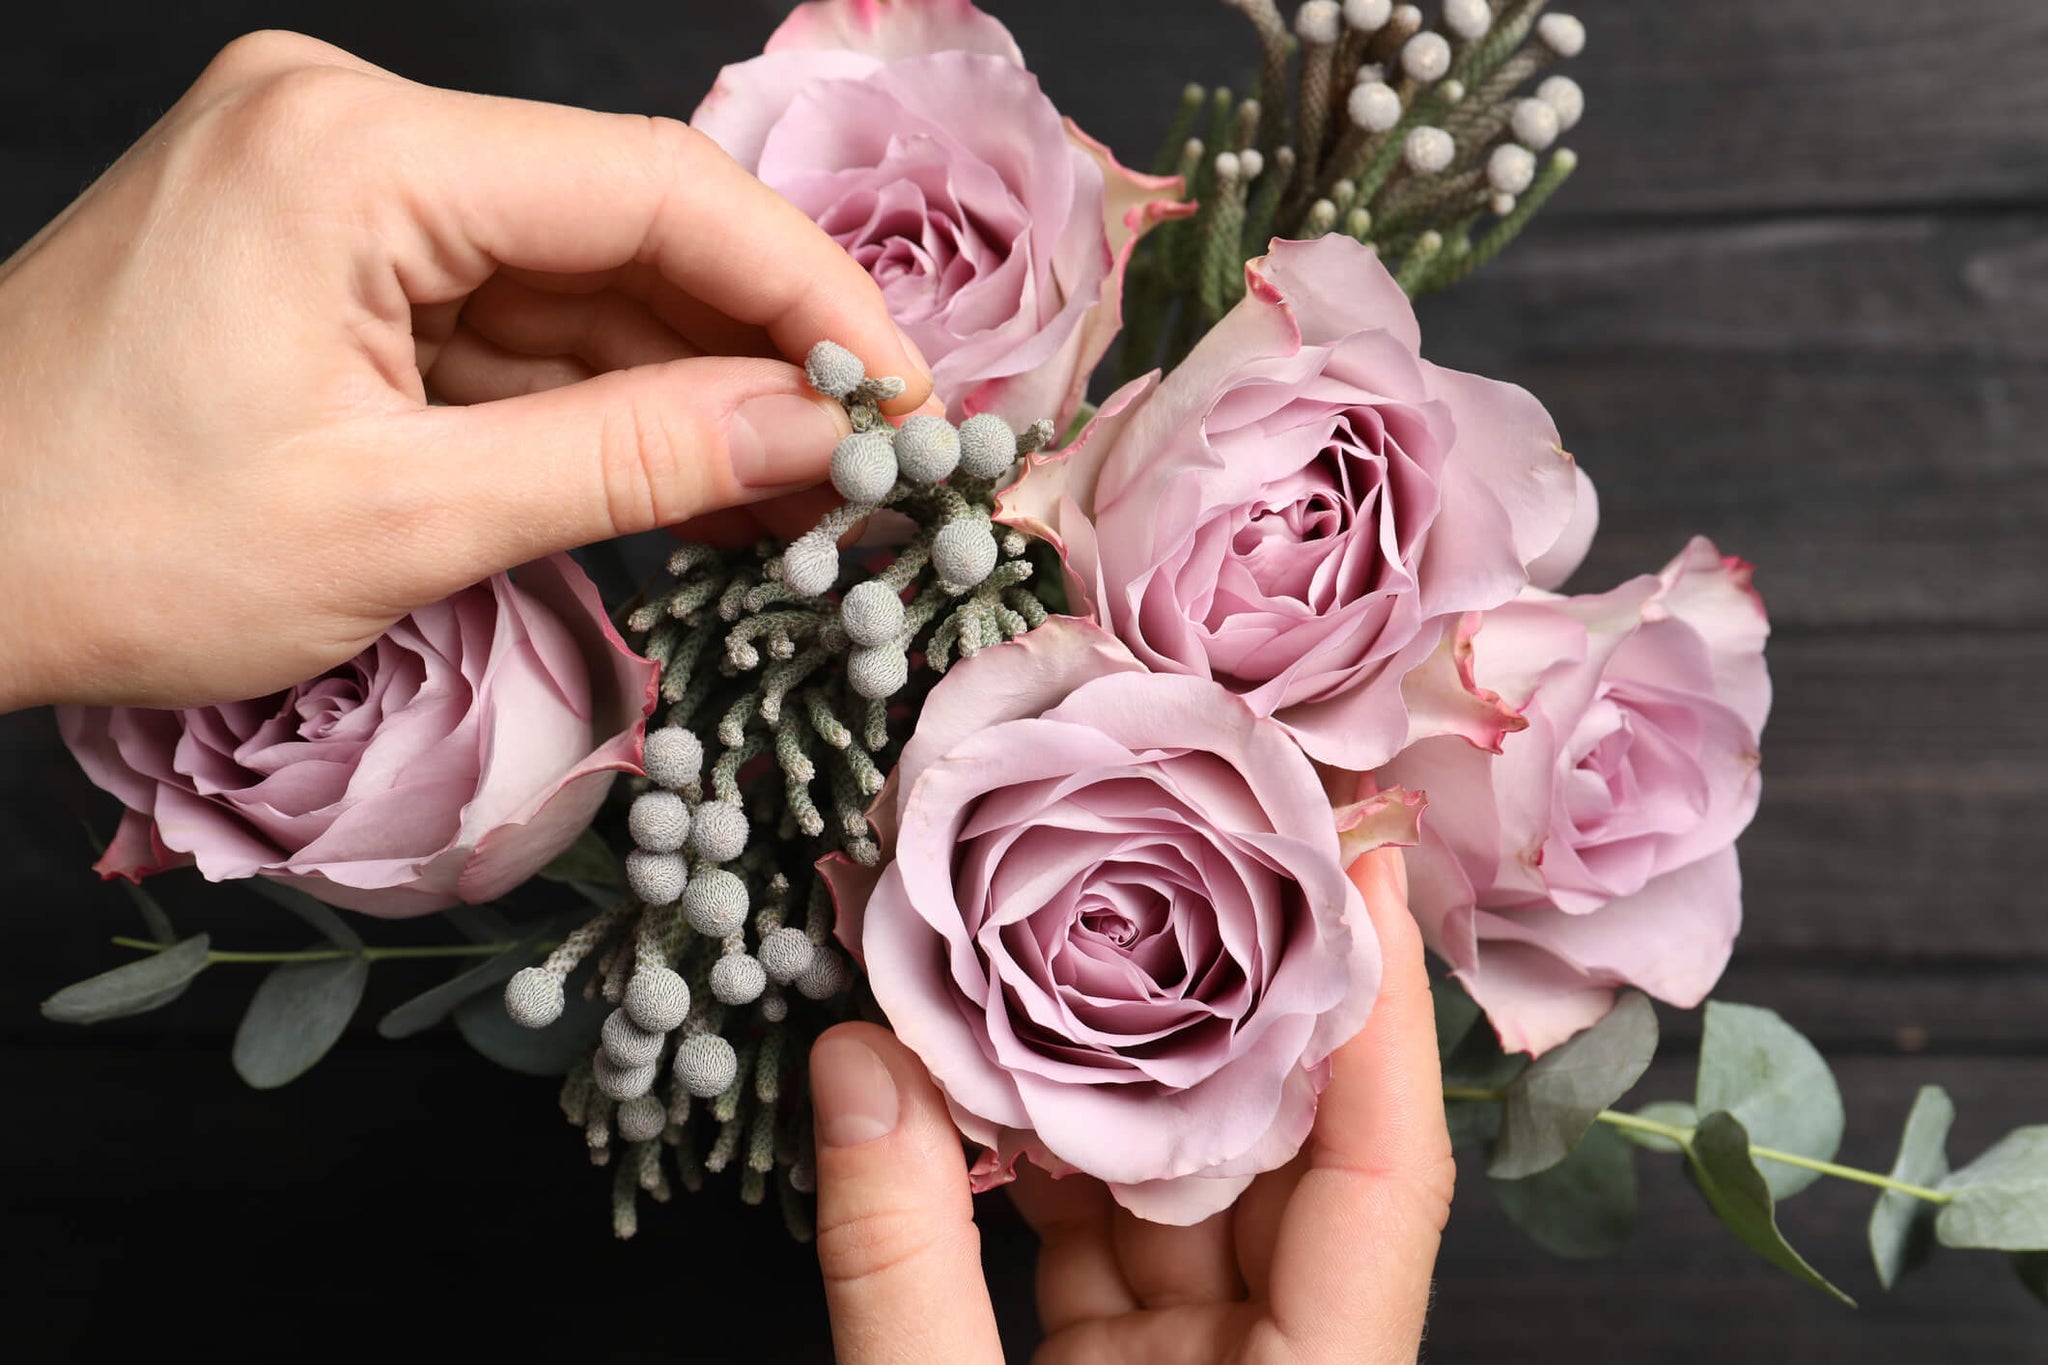 A person adding smaller flowers to a wedding bouquet.